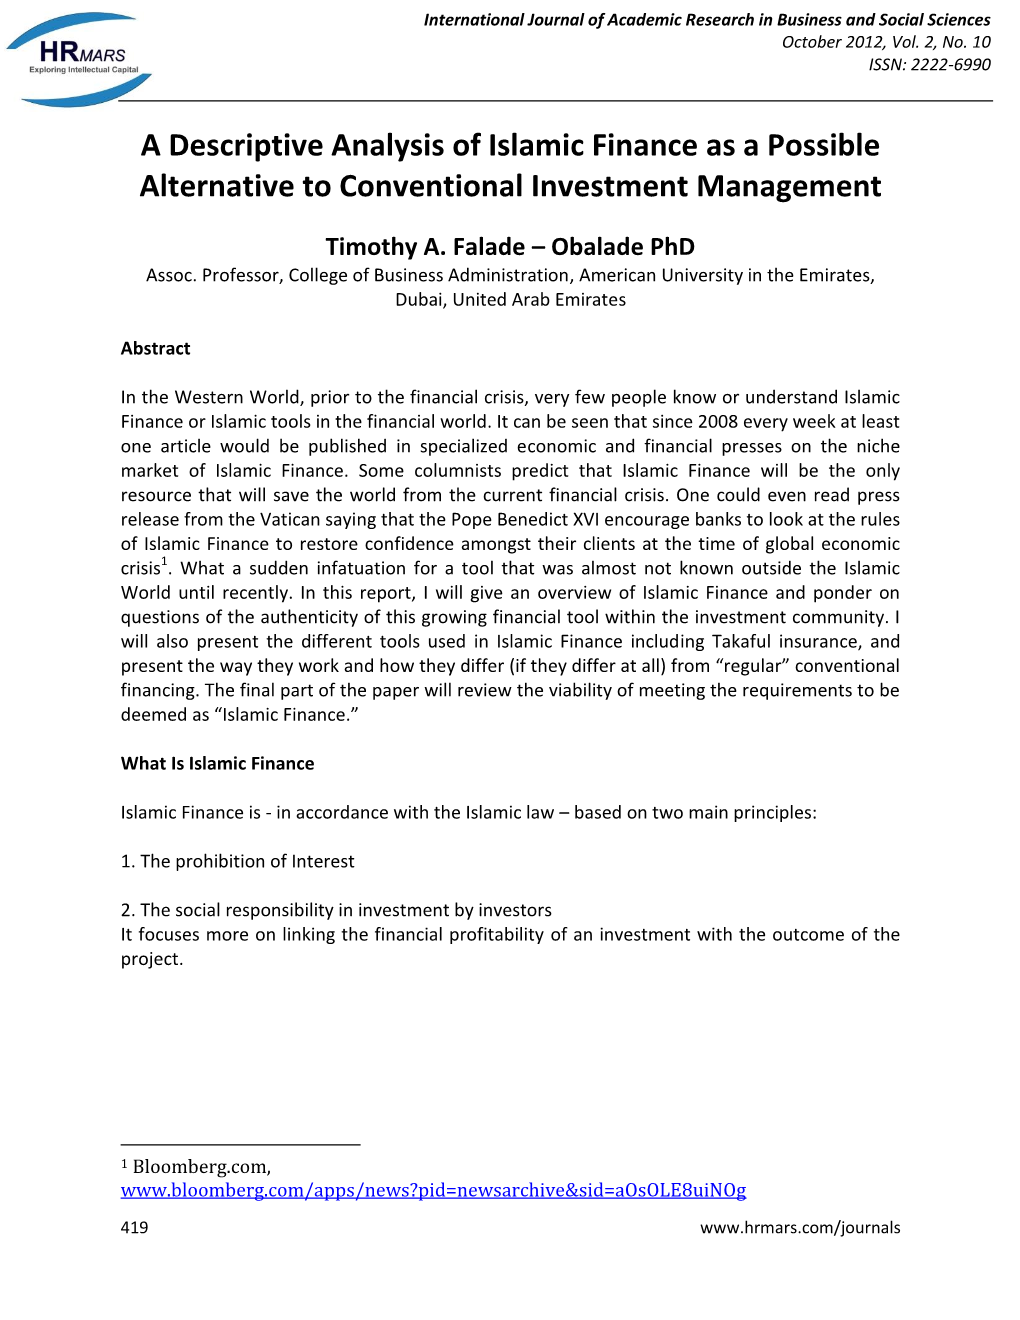 A Descriptive Analysis of Islamic Finance As a Possible Alternative to Conventional Investment Management